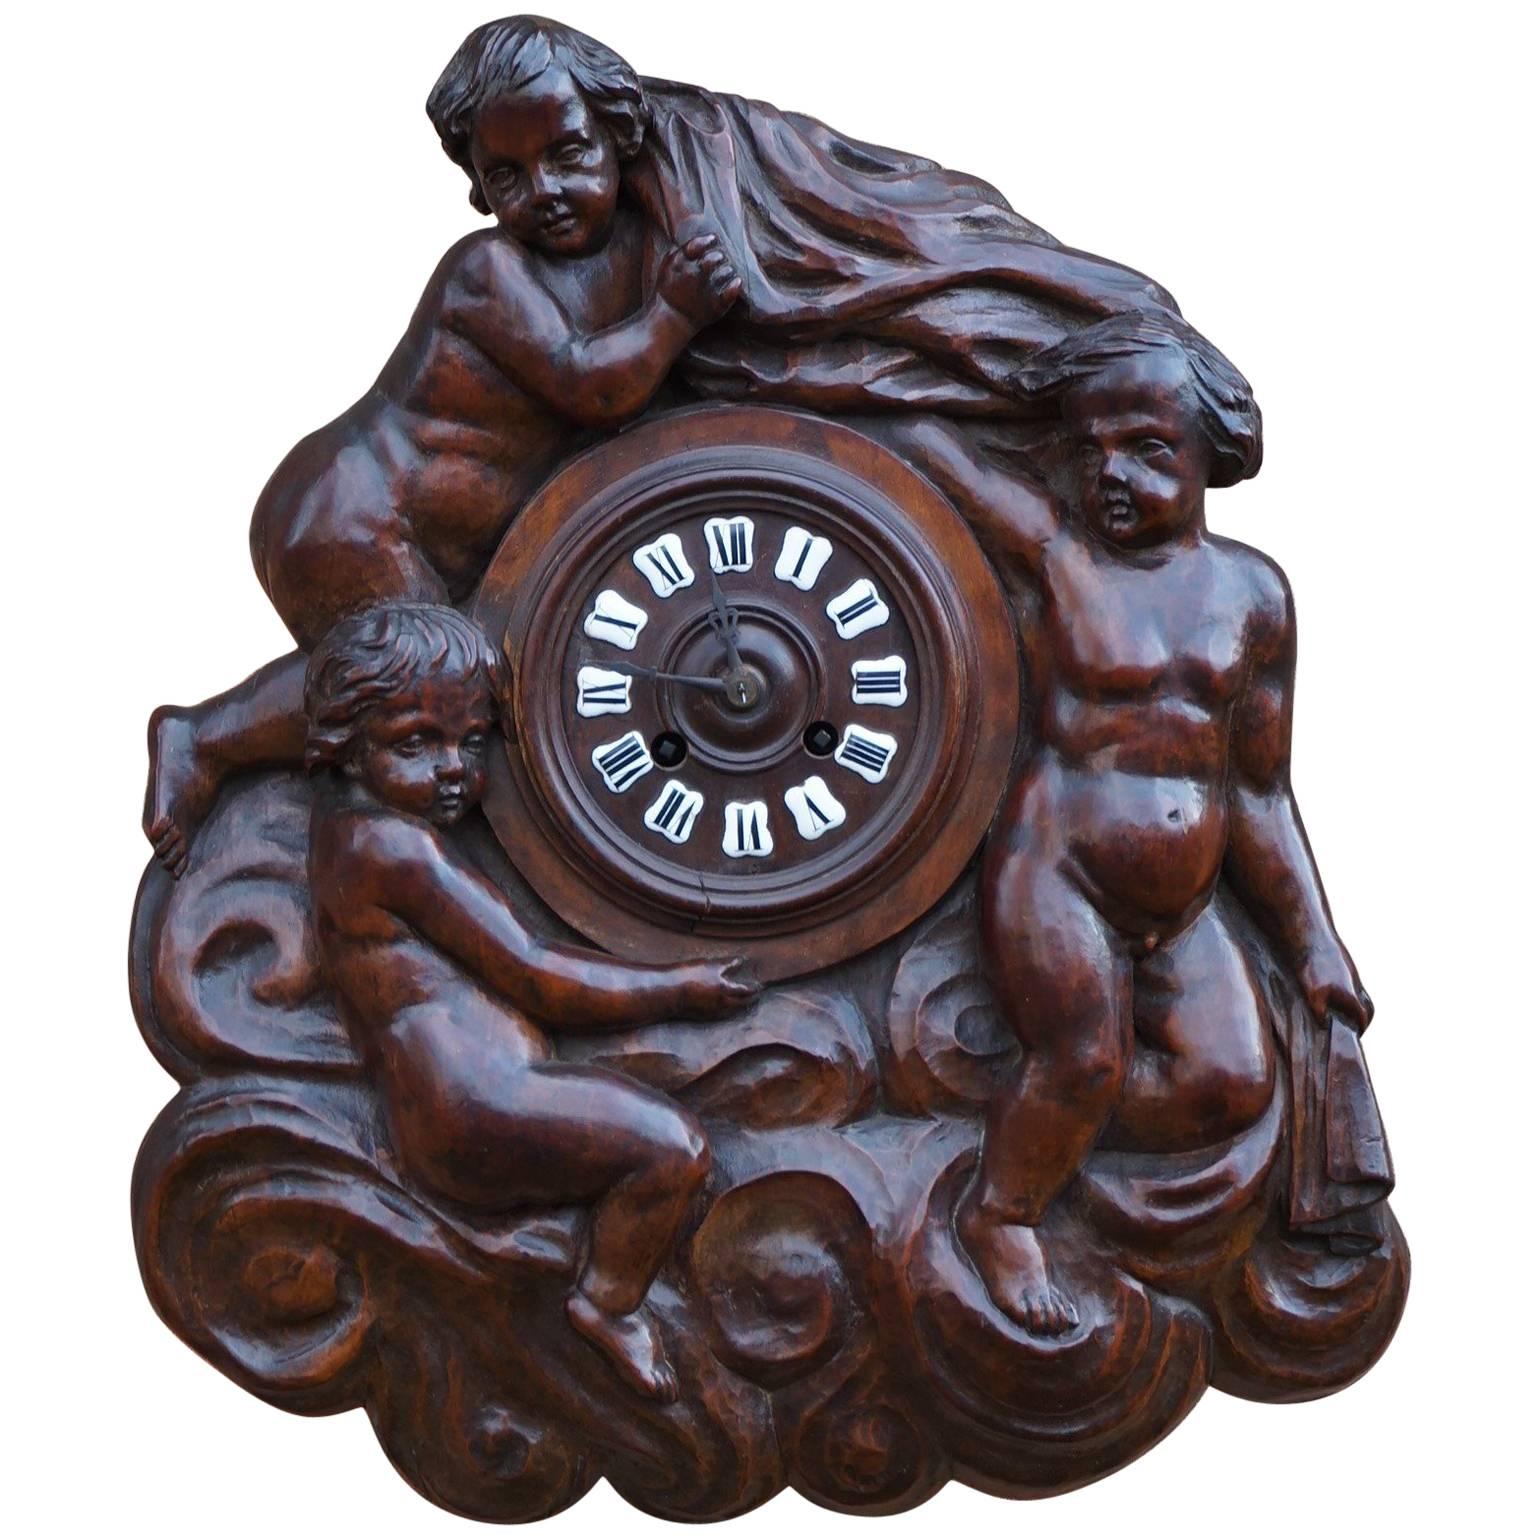 Antique Hand-Carved French Renaissance Revival Wall Clock W. Putto Sculptures